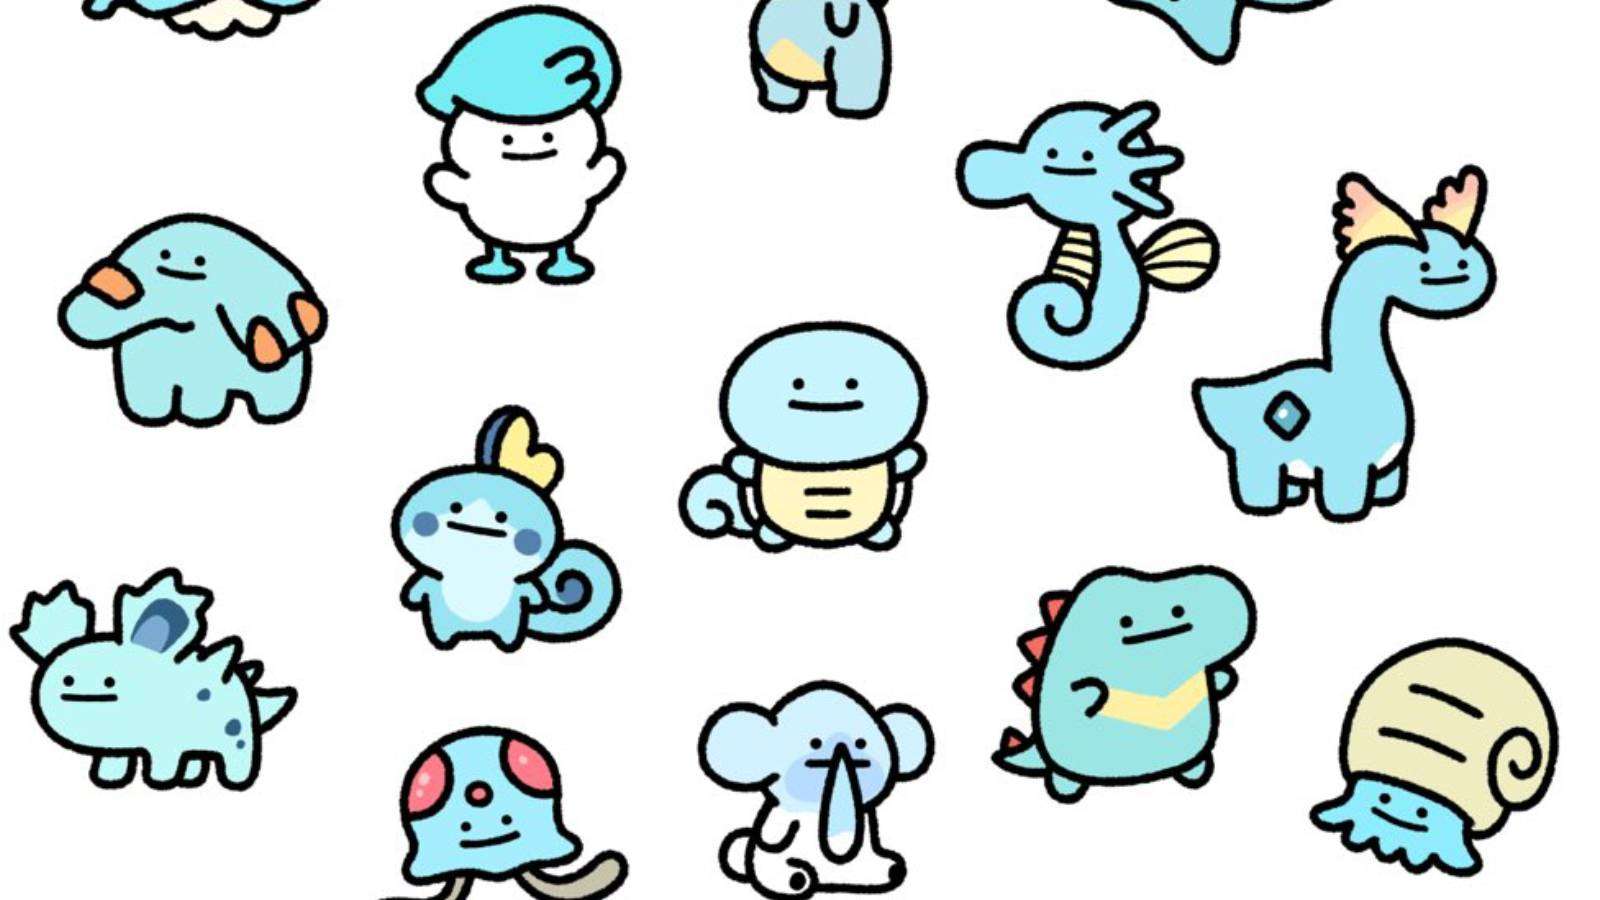 Art from USGMEN shows several different water Pokemon but with the distinctive Ditto face